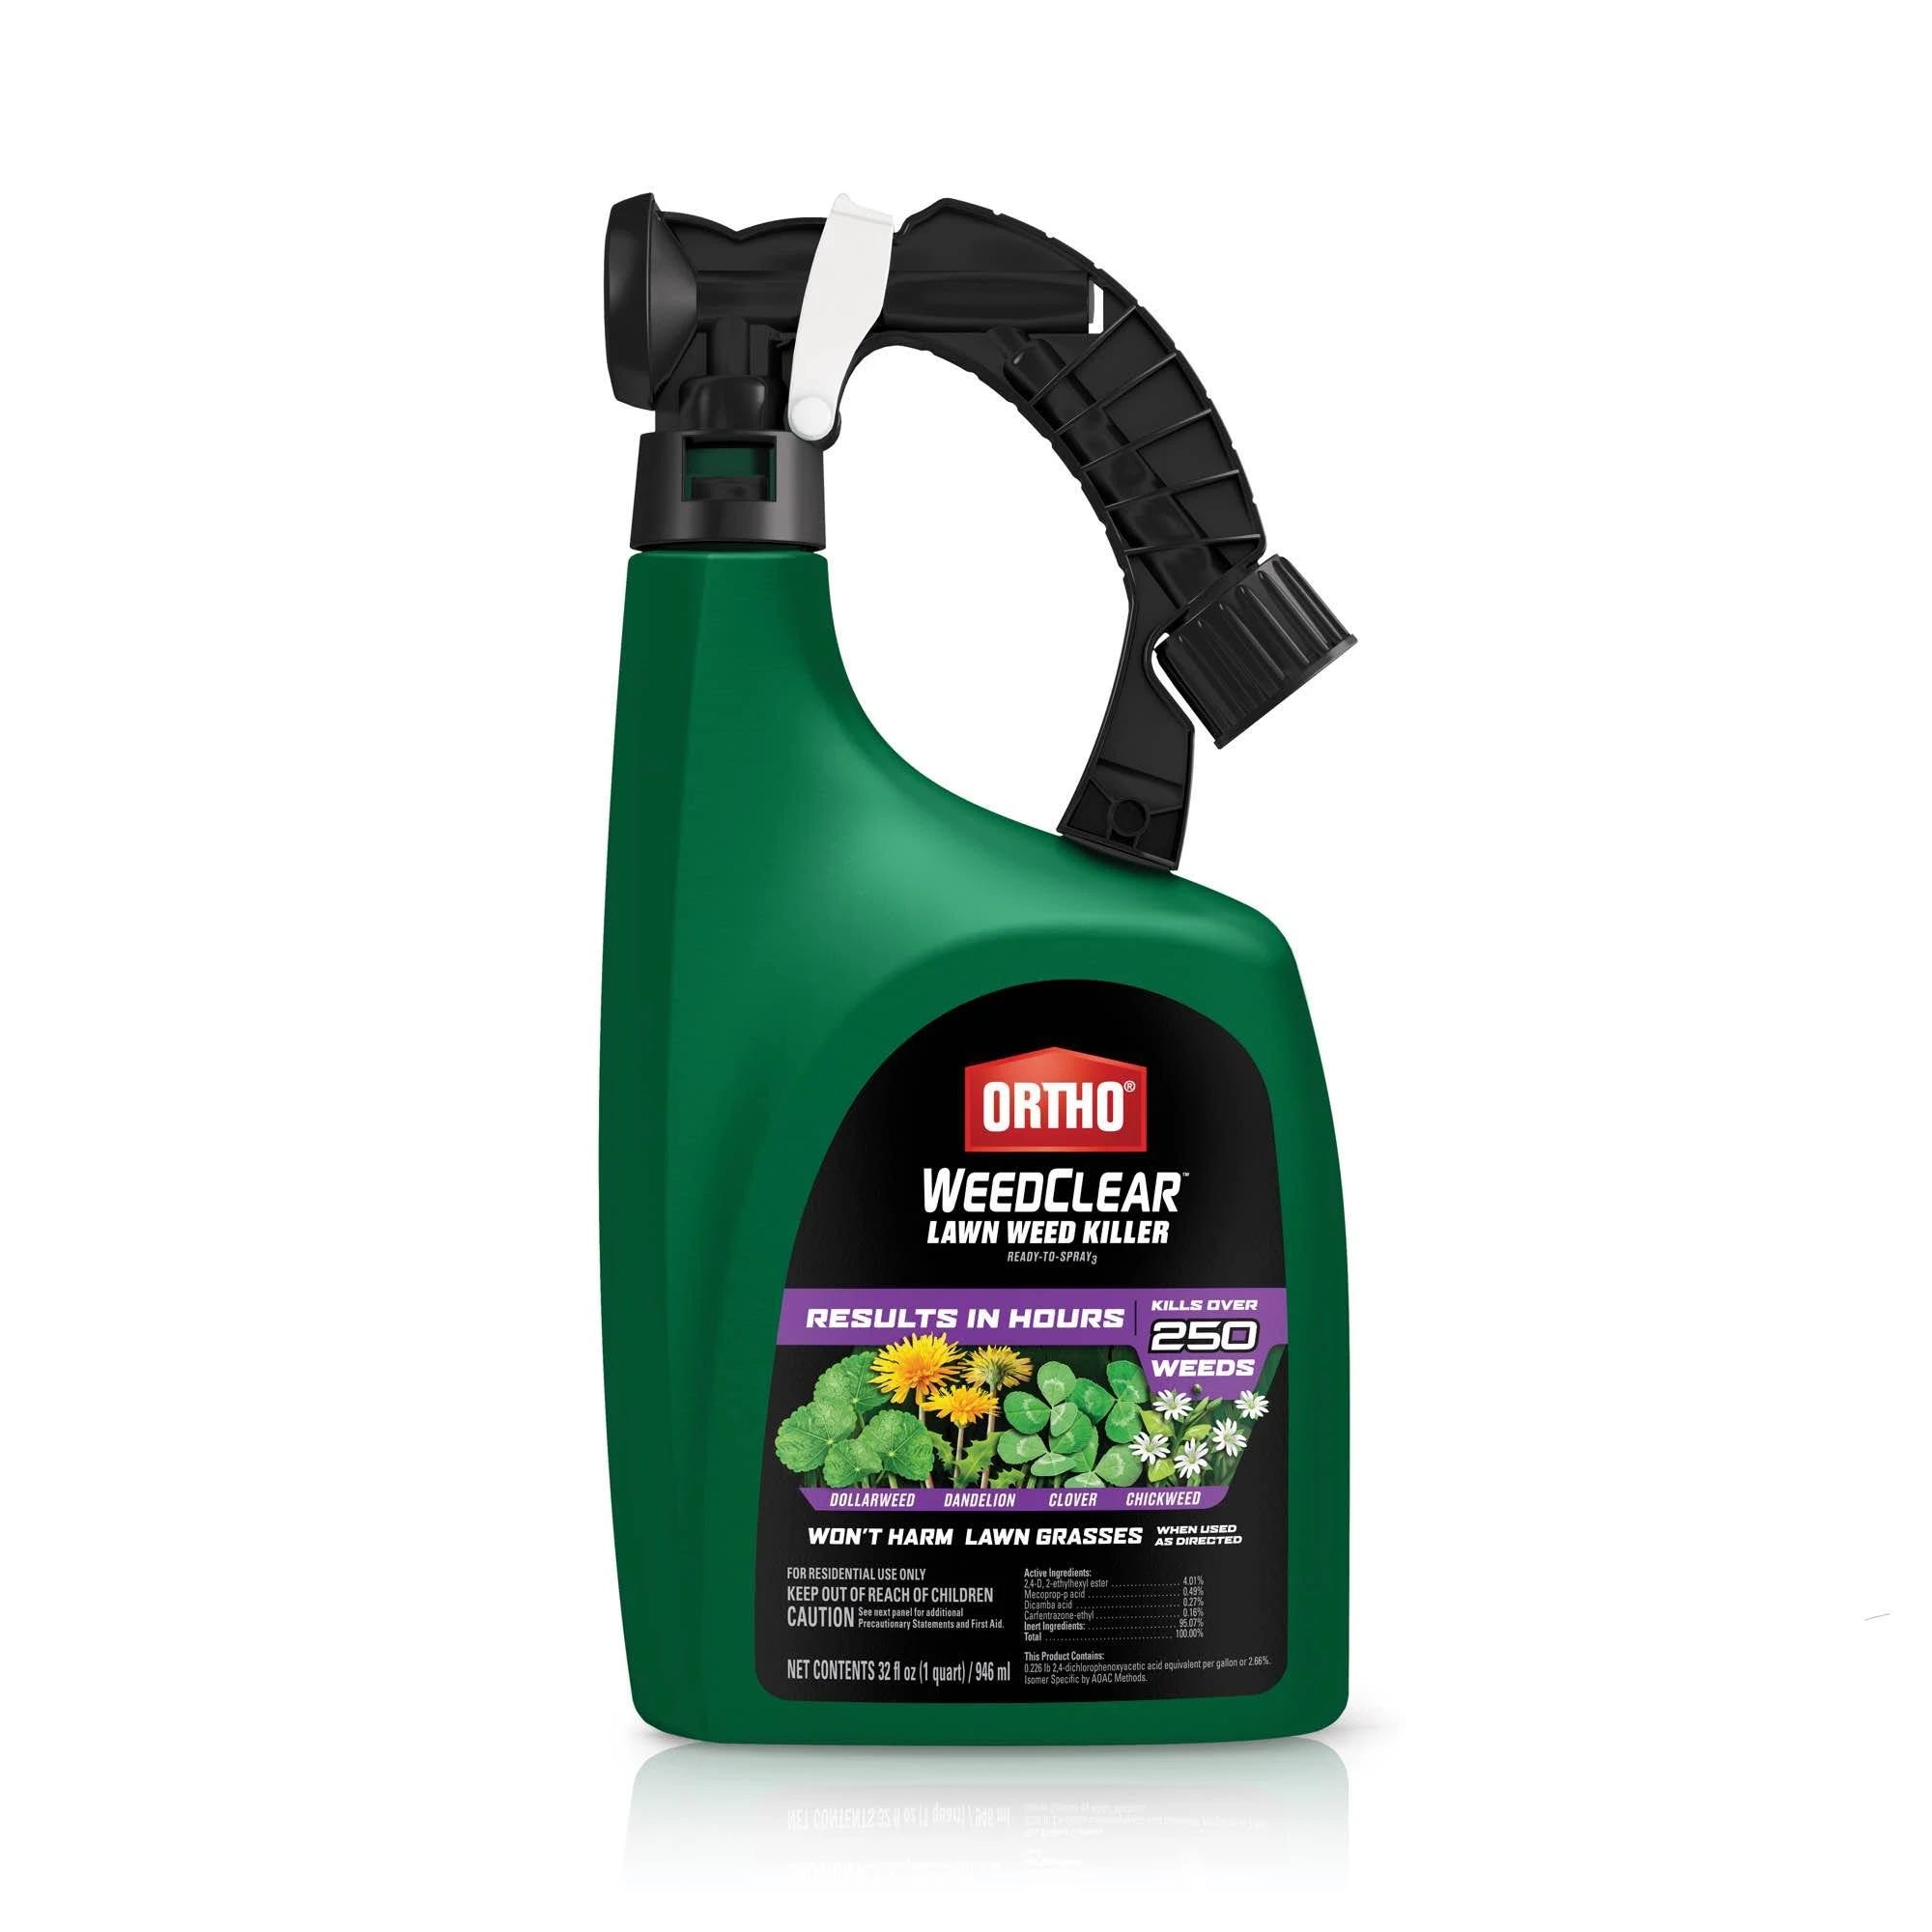 Pet-Safe Weed Killer for Lawn: Ortho WeedClear 32oz Lawn Weed Killer | Image